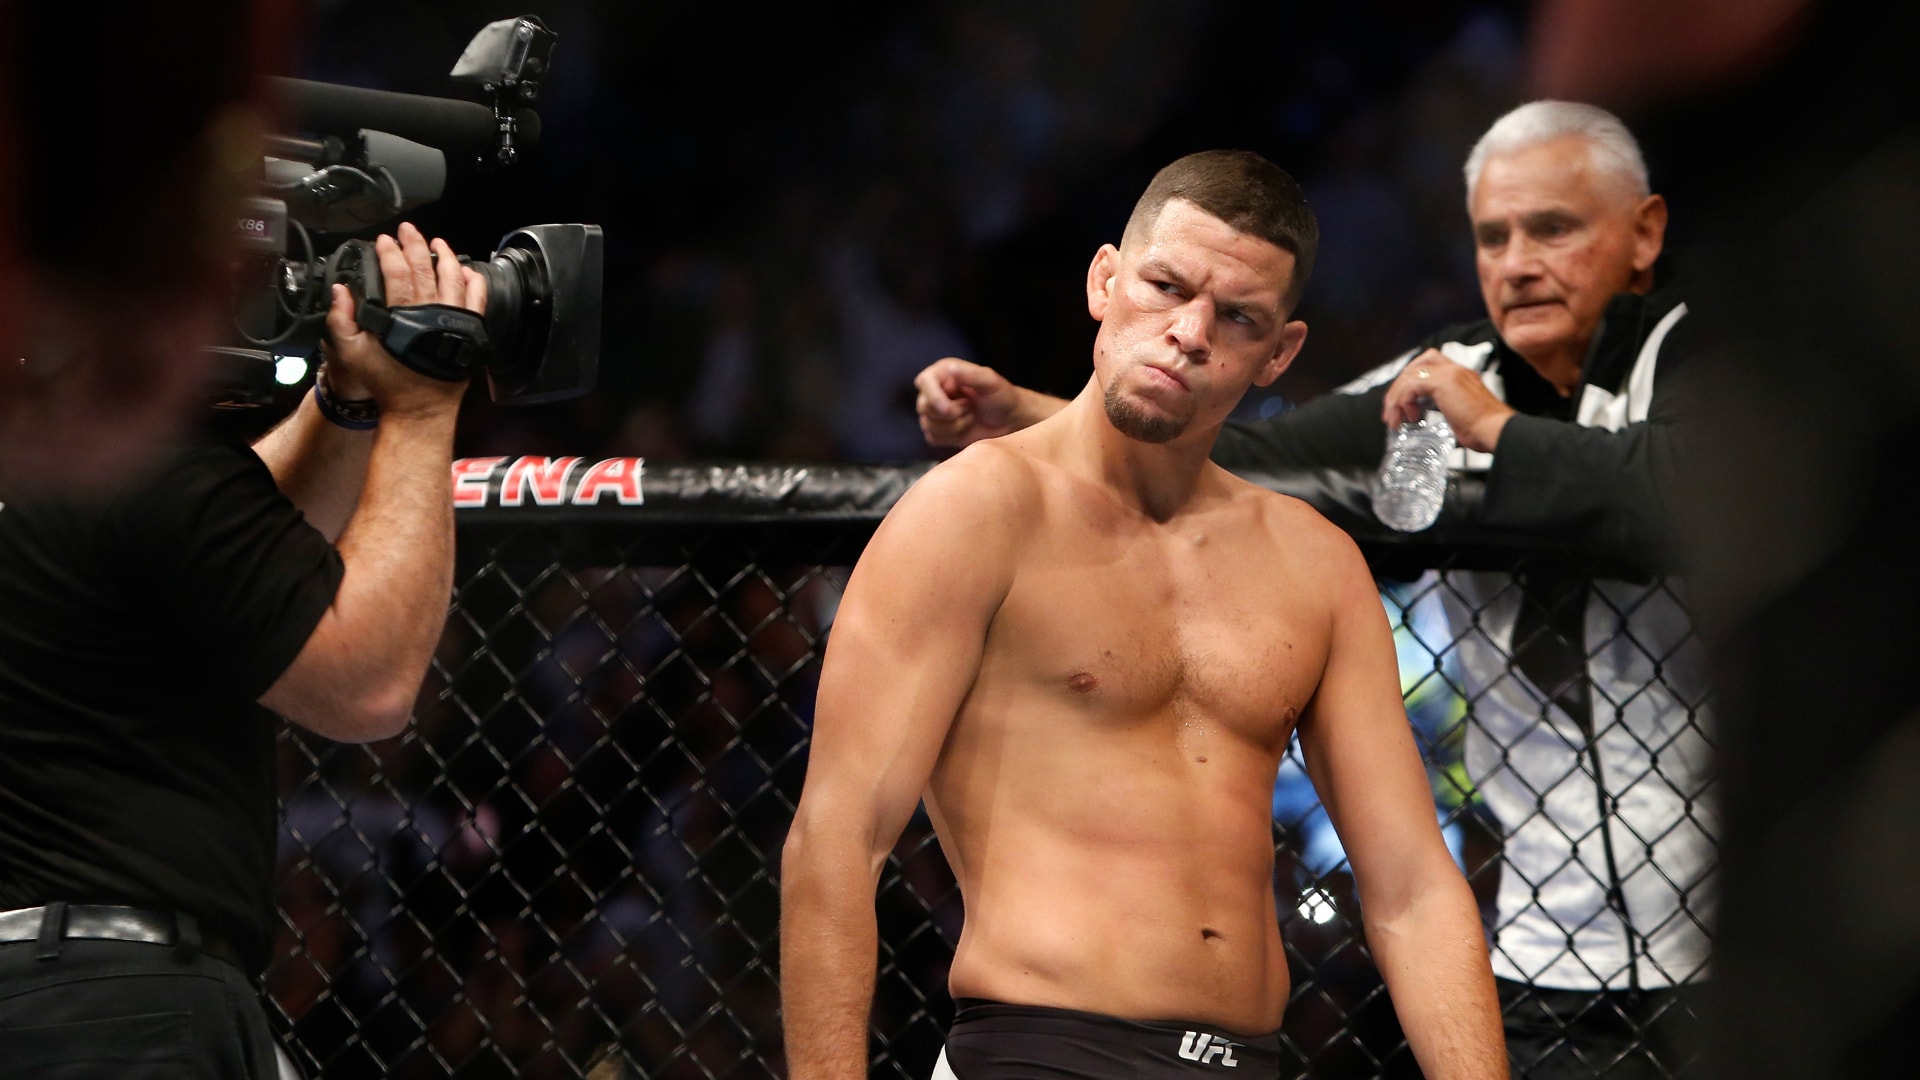 Nate Diaz: The undeniable star